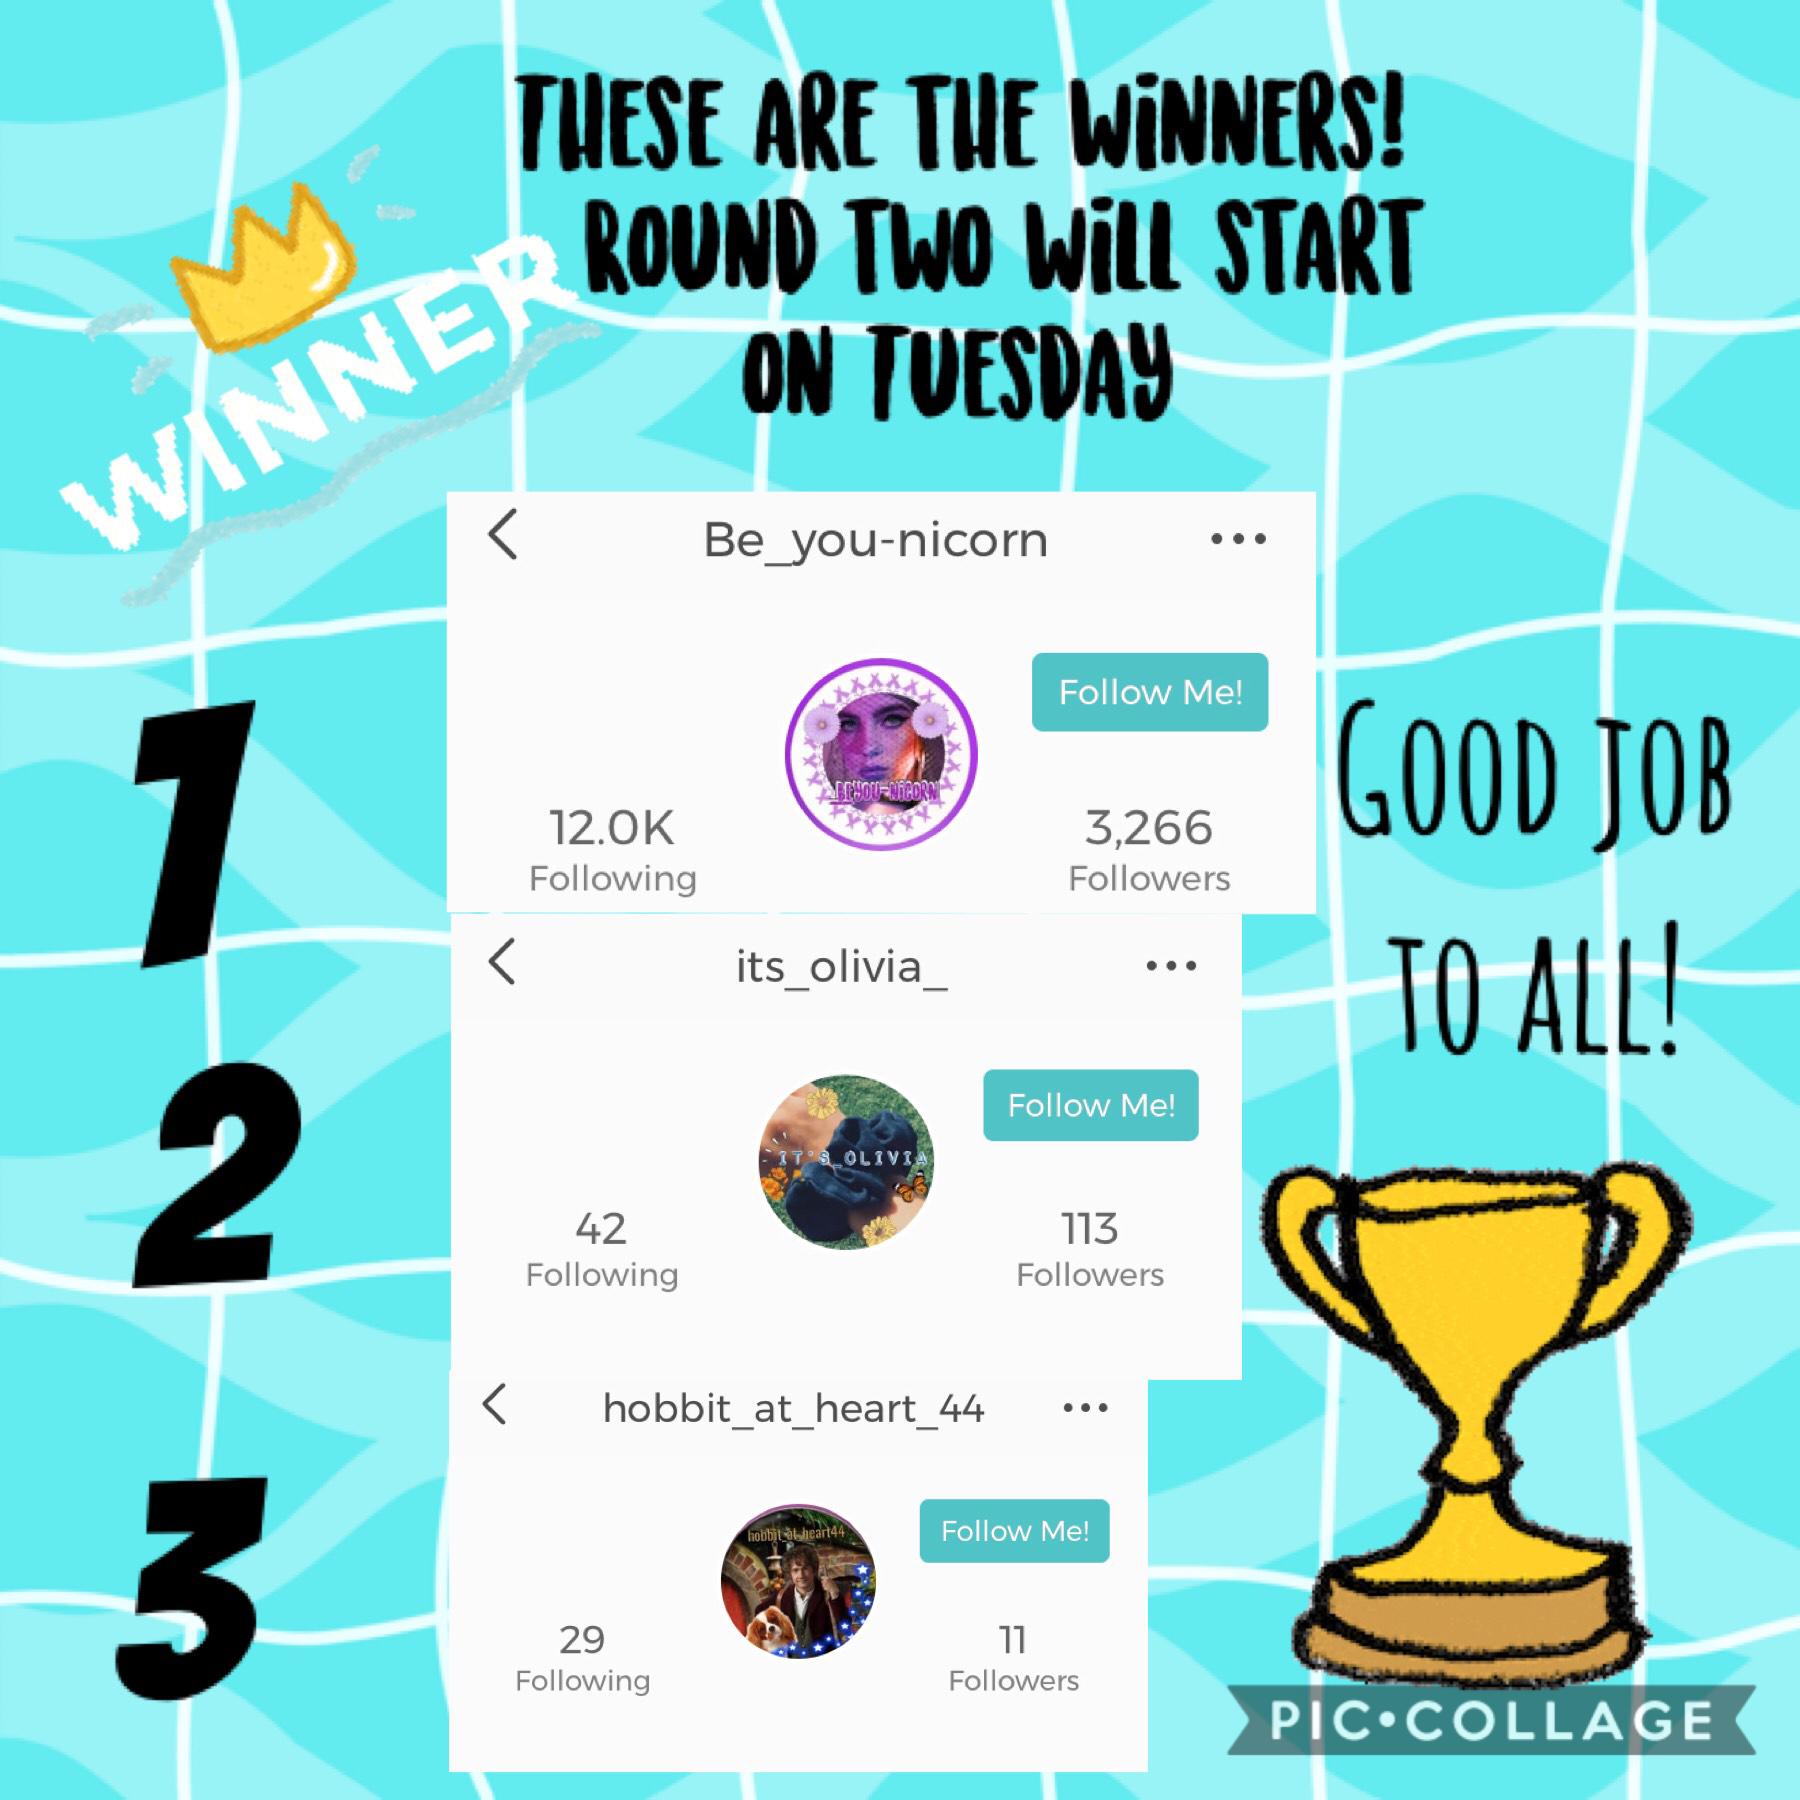 Good job! This was a hard one! Round two will start on Tuesday. I will give you the results on Friday! Good luck to all!